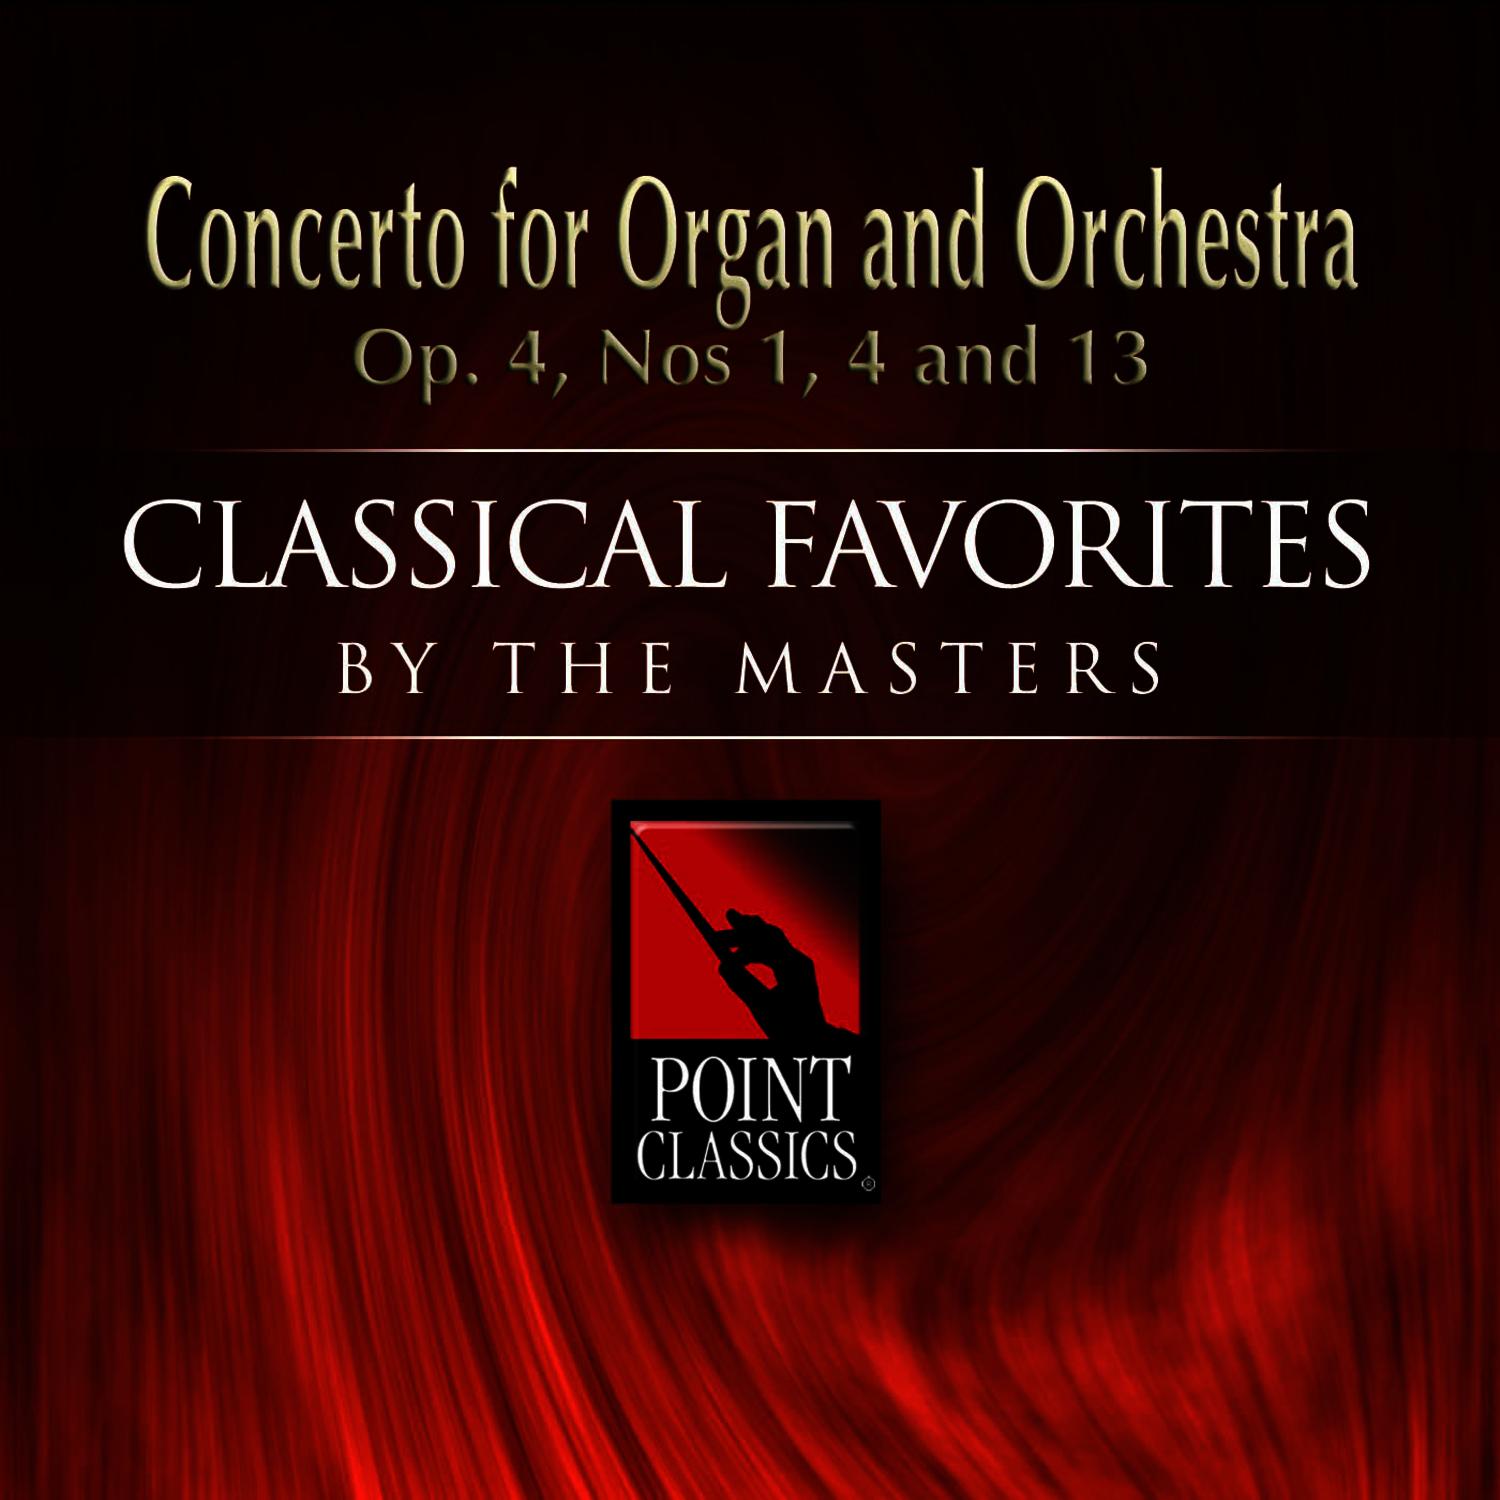 Concerto for Organ and Orchestra Op. 4 No. 1 in G minor: Allegro